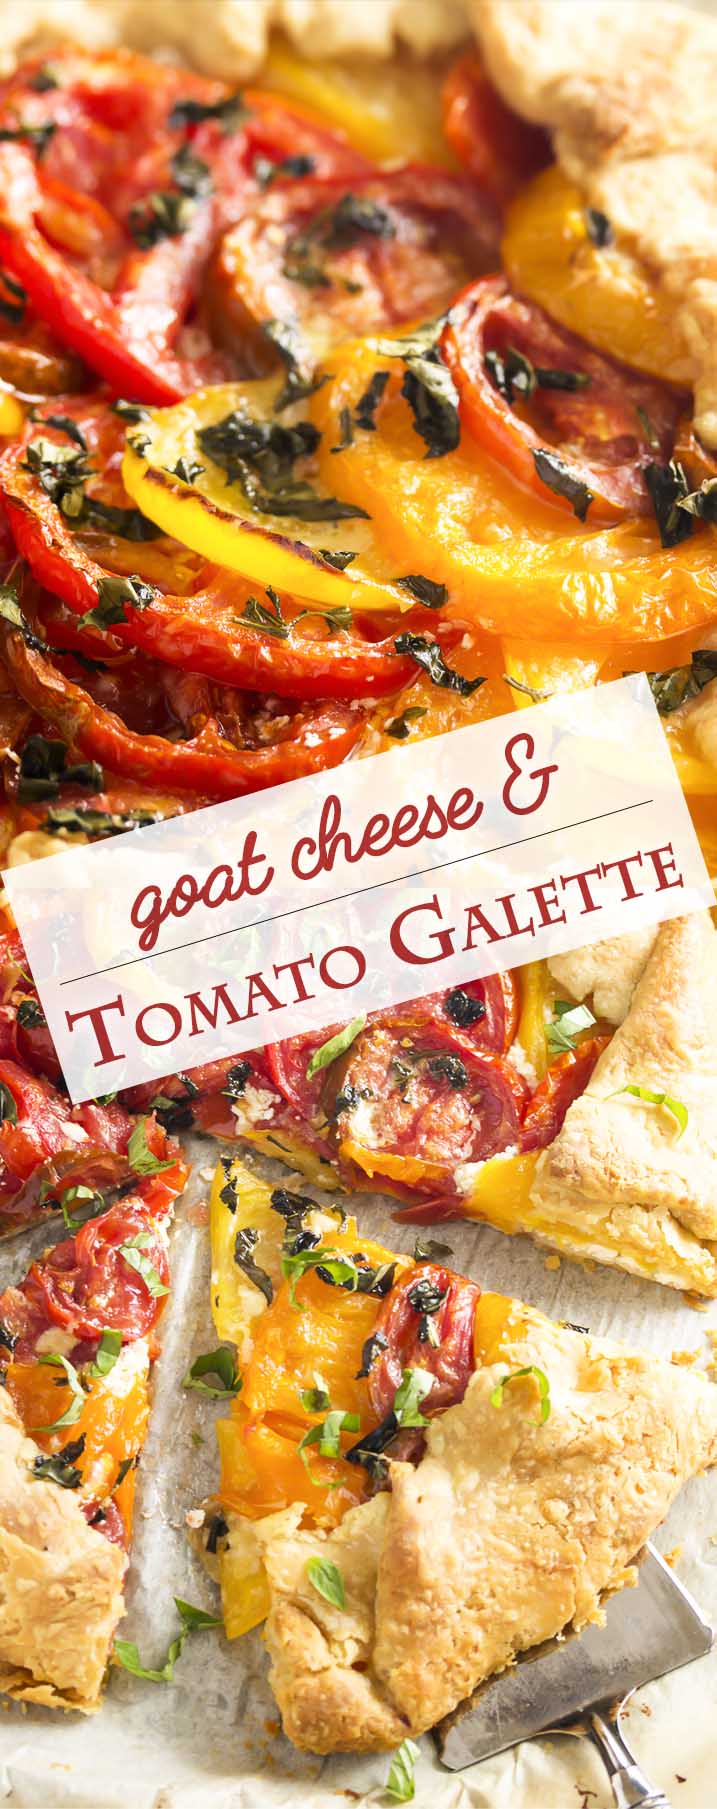 This savory tomato galette is a rustic tart in the French tradition, full of juicy, sweet heirloom tomatoes and creamy goat cheese and then folded into a simple pastry crust. | justalittlebitofbacon.com